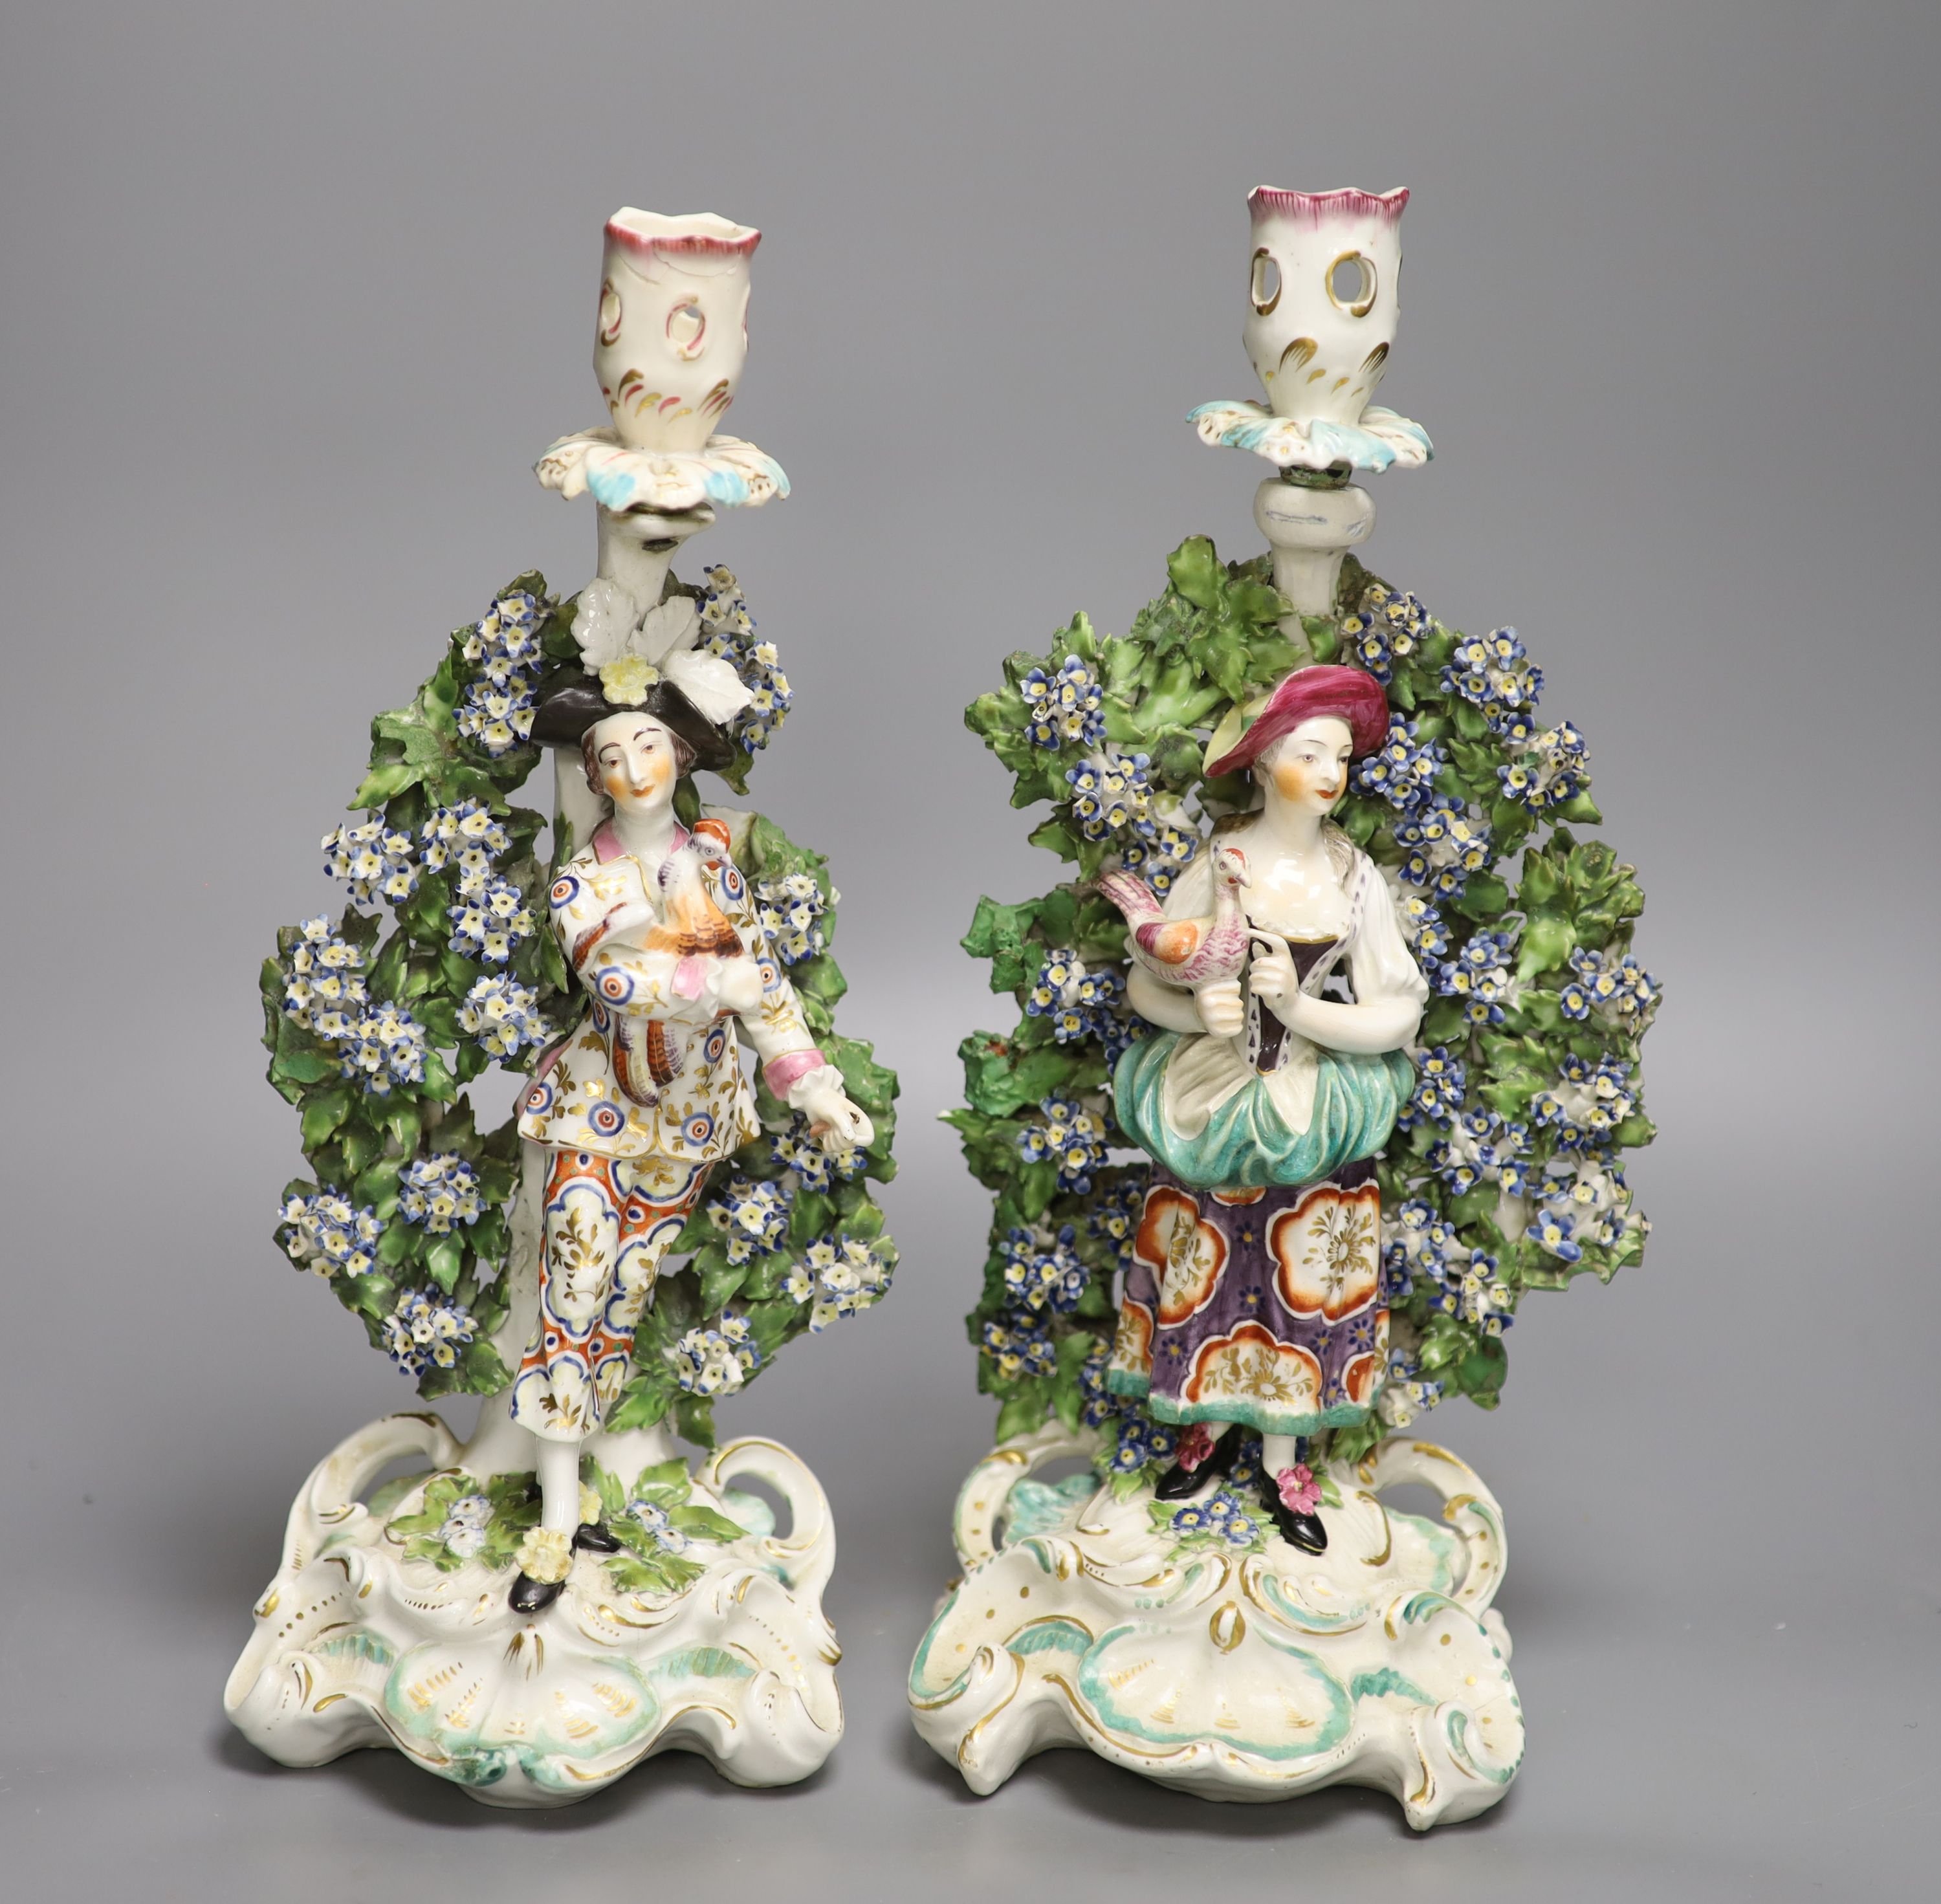 A pair of Derby candlestick figures of the Italian Farmer and wife, he holding a rooster, and her